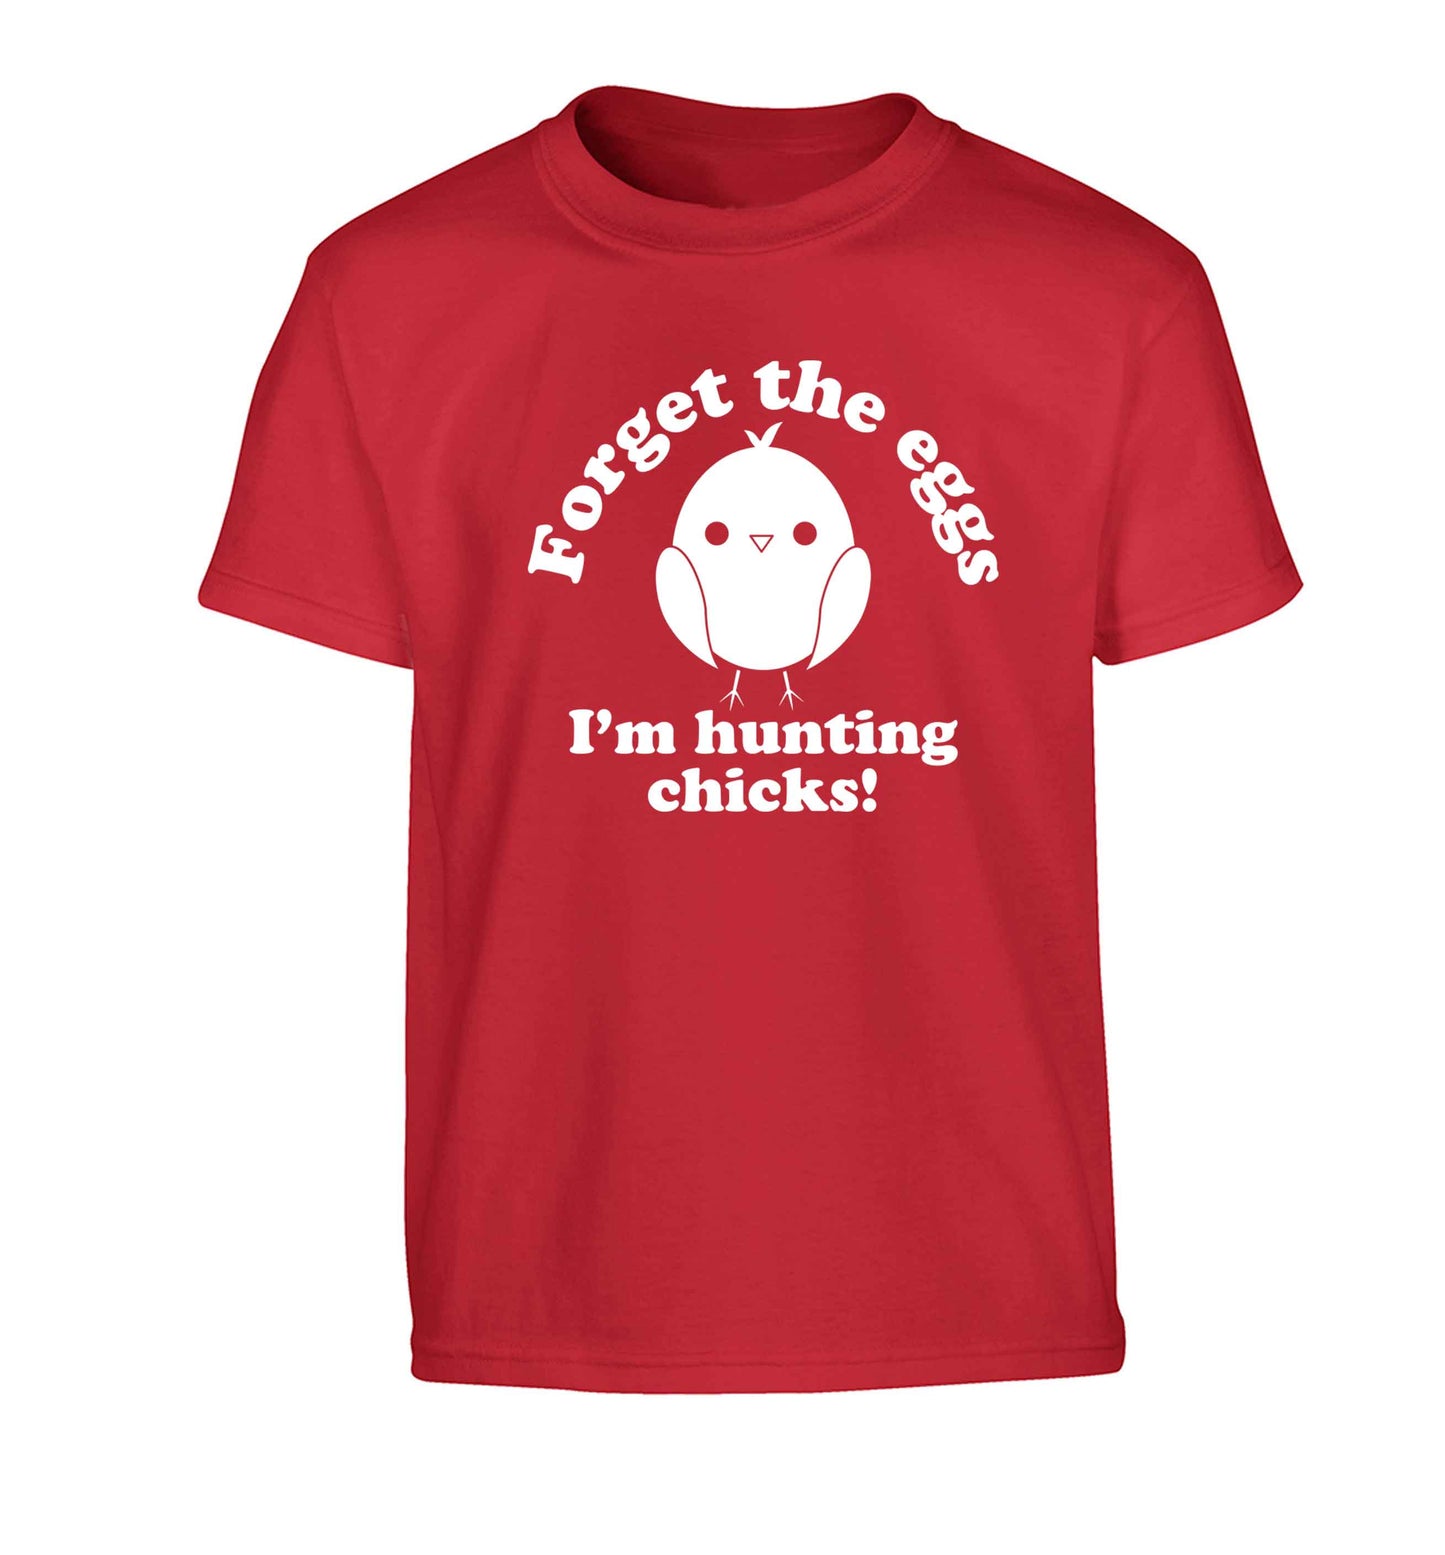 Forget the eggs I'm hunting chicks! Children's red Tshirt 12-13 Years